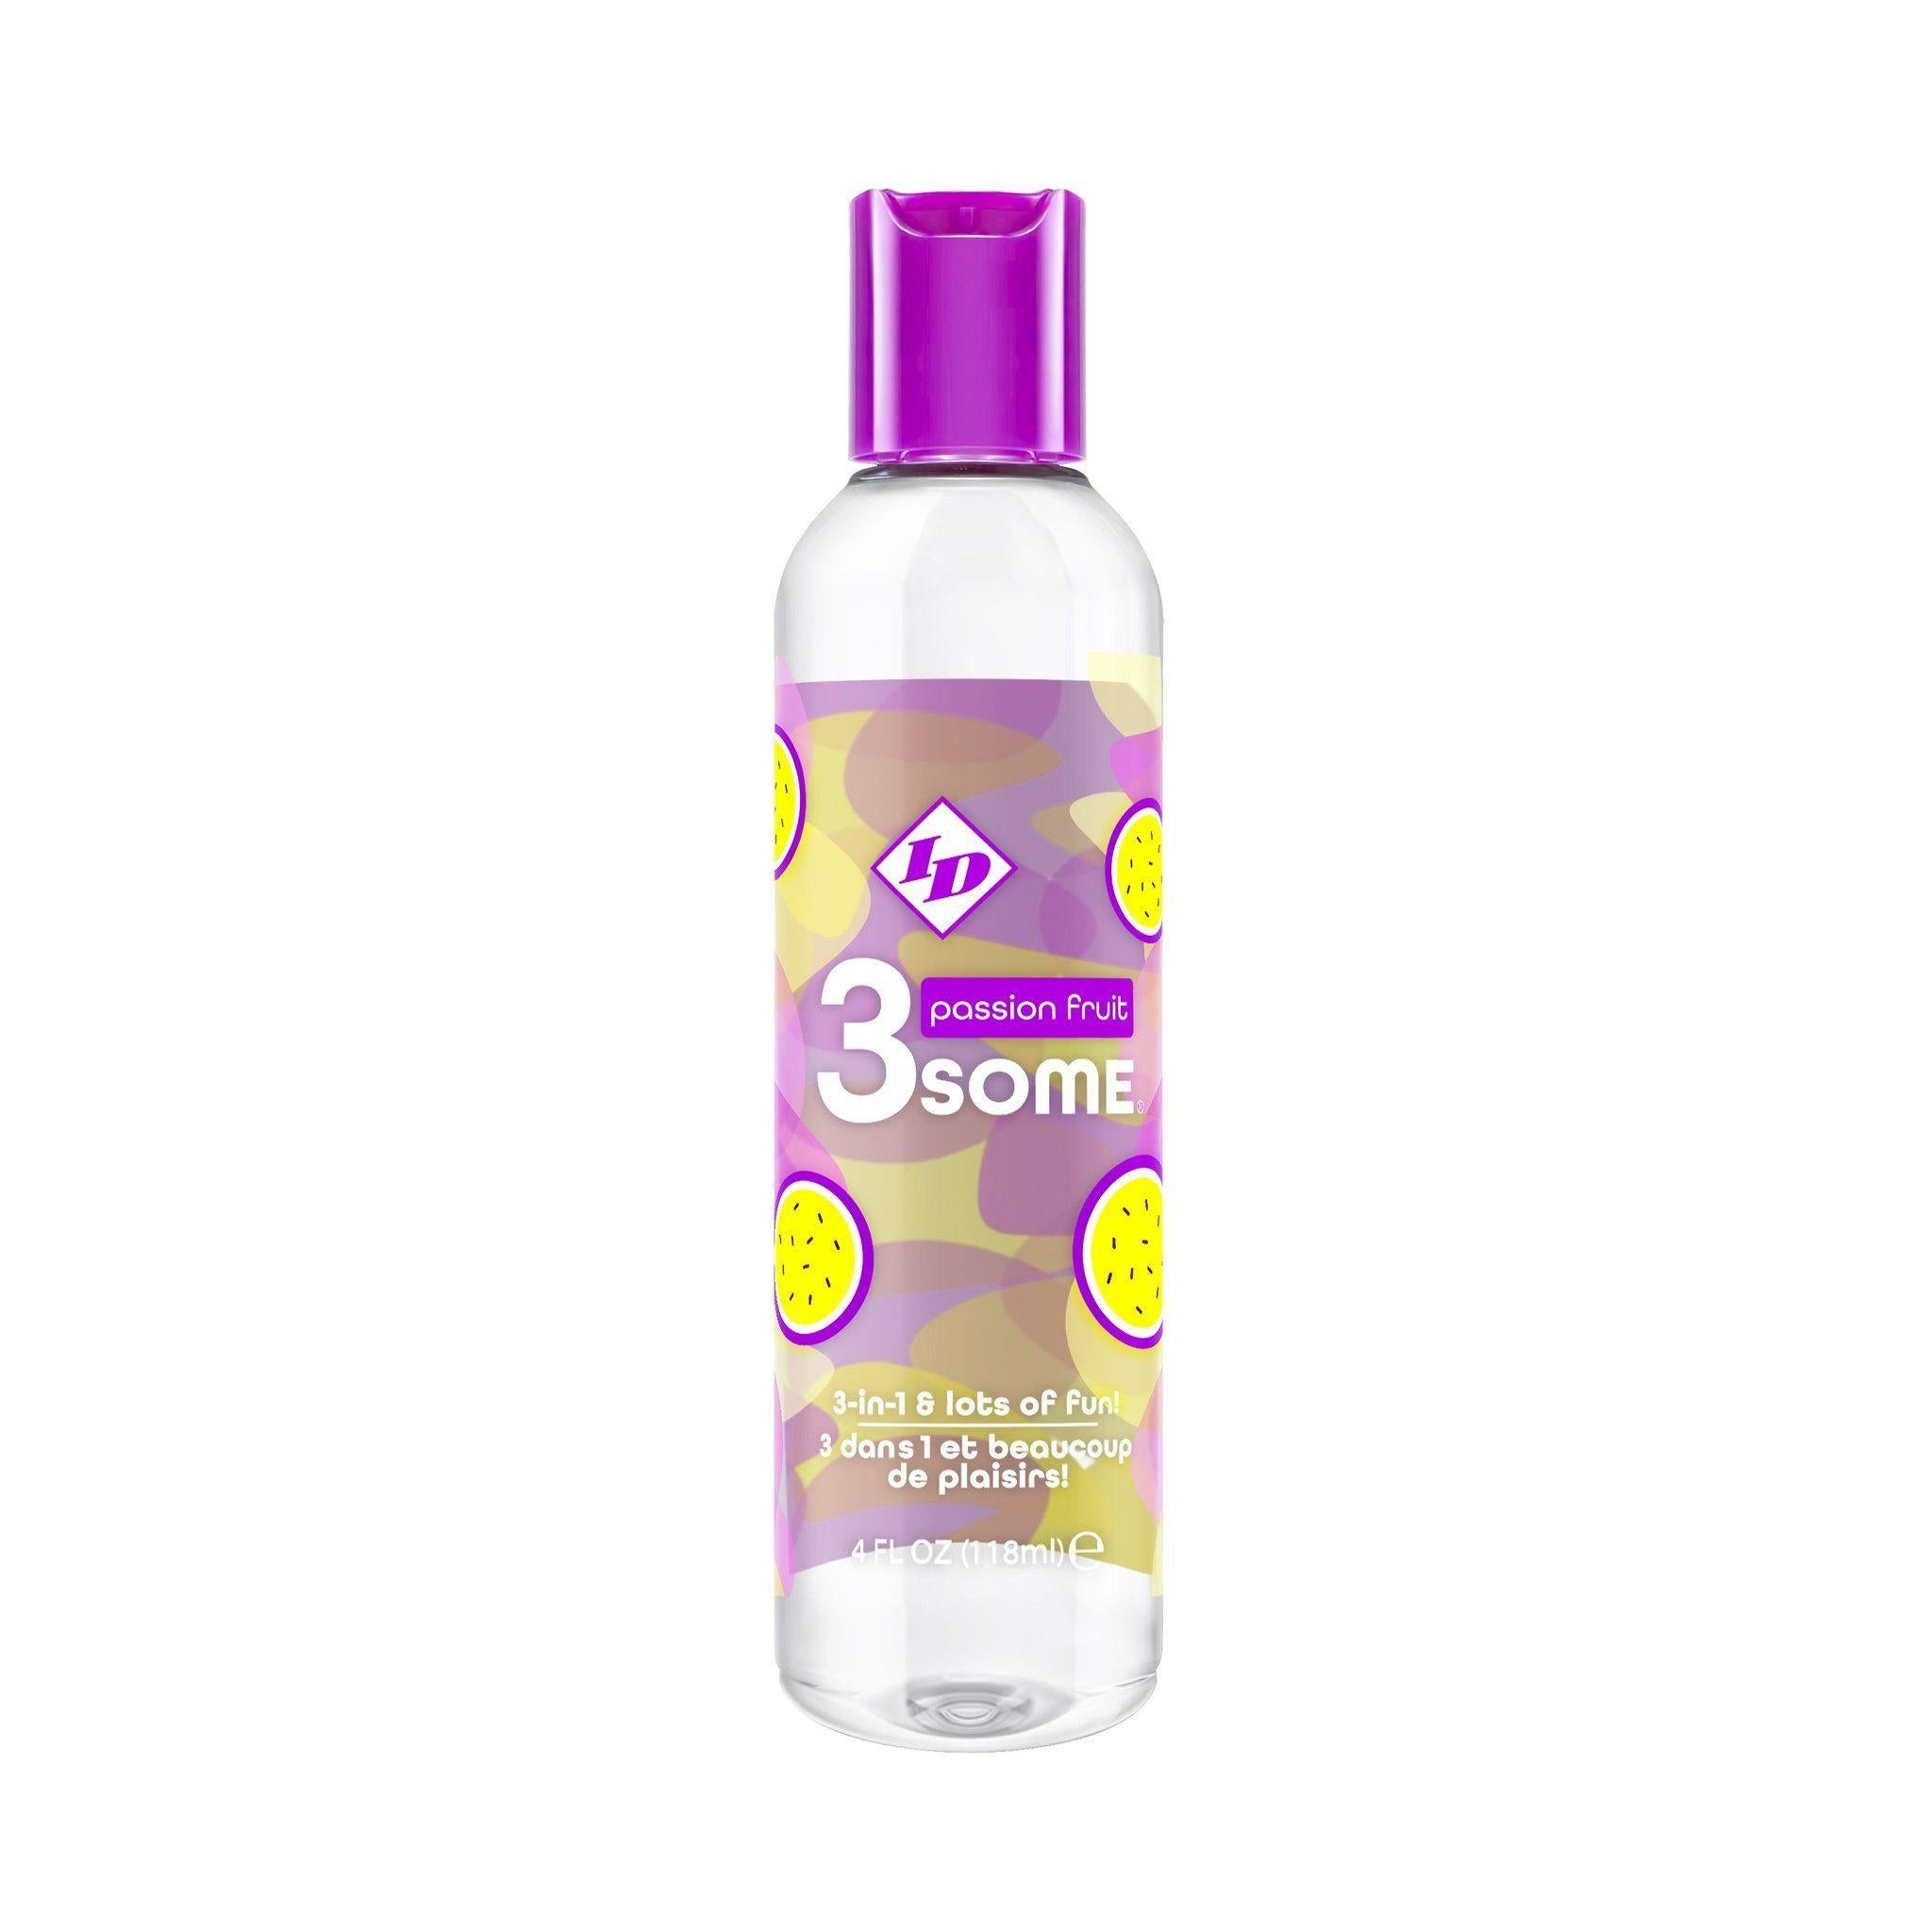 ID 3Some 3-in-1 & Lots Of Fun - Warming, Lickable, & Massage 4 oz (118 mL) - 4 Flavors! - CheapLubes.com